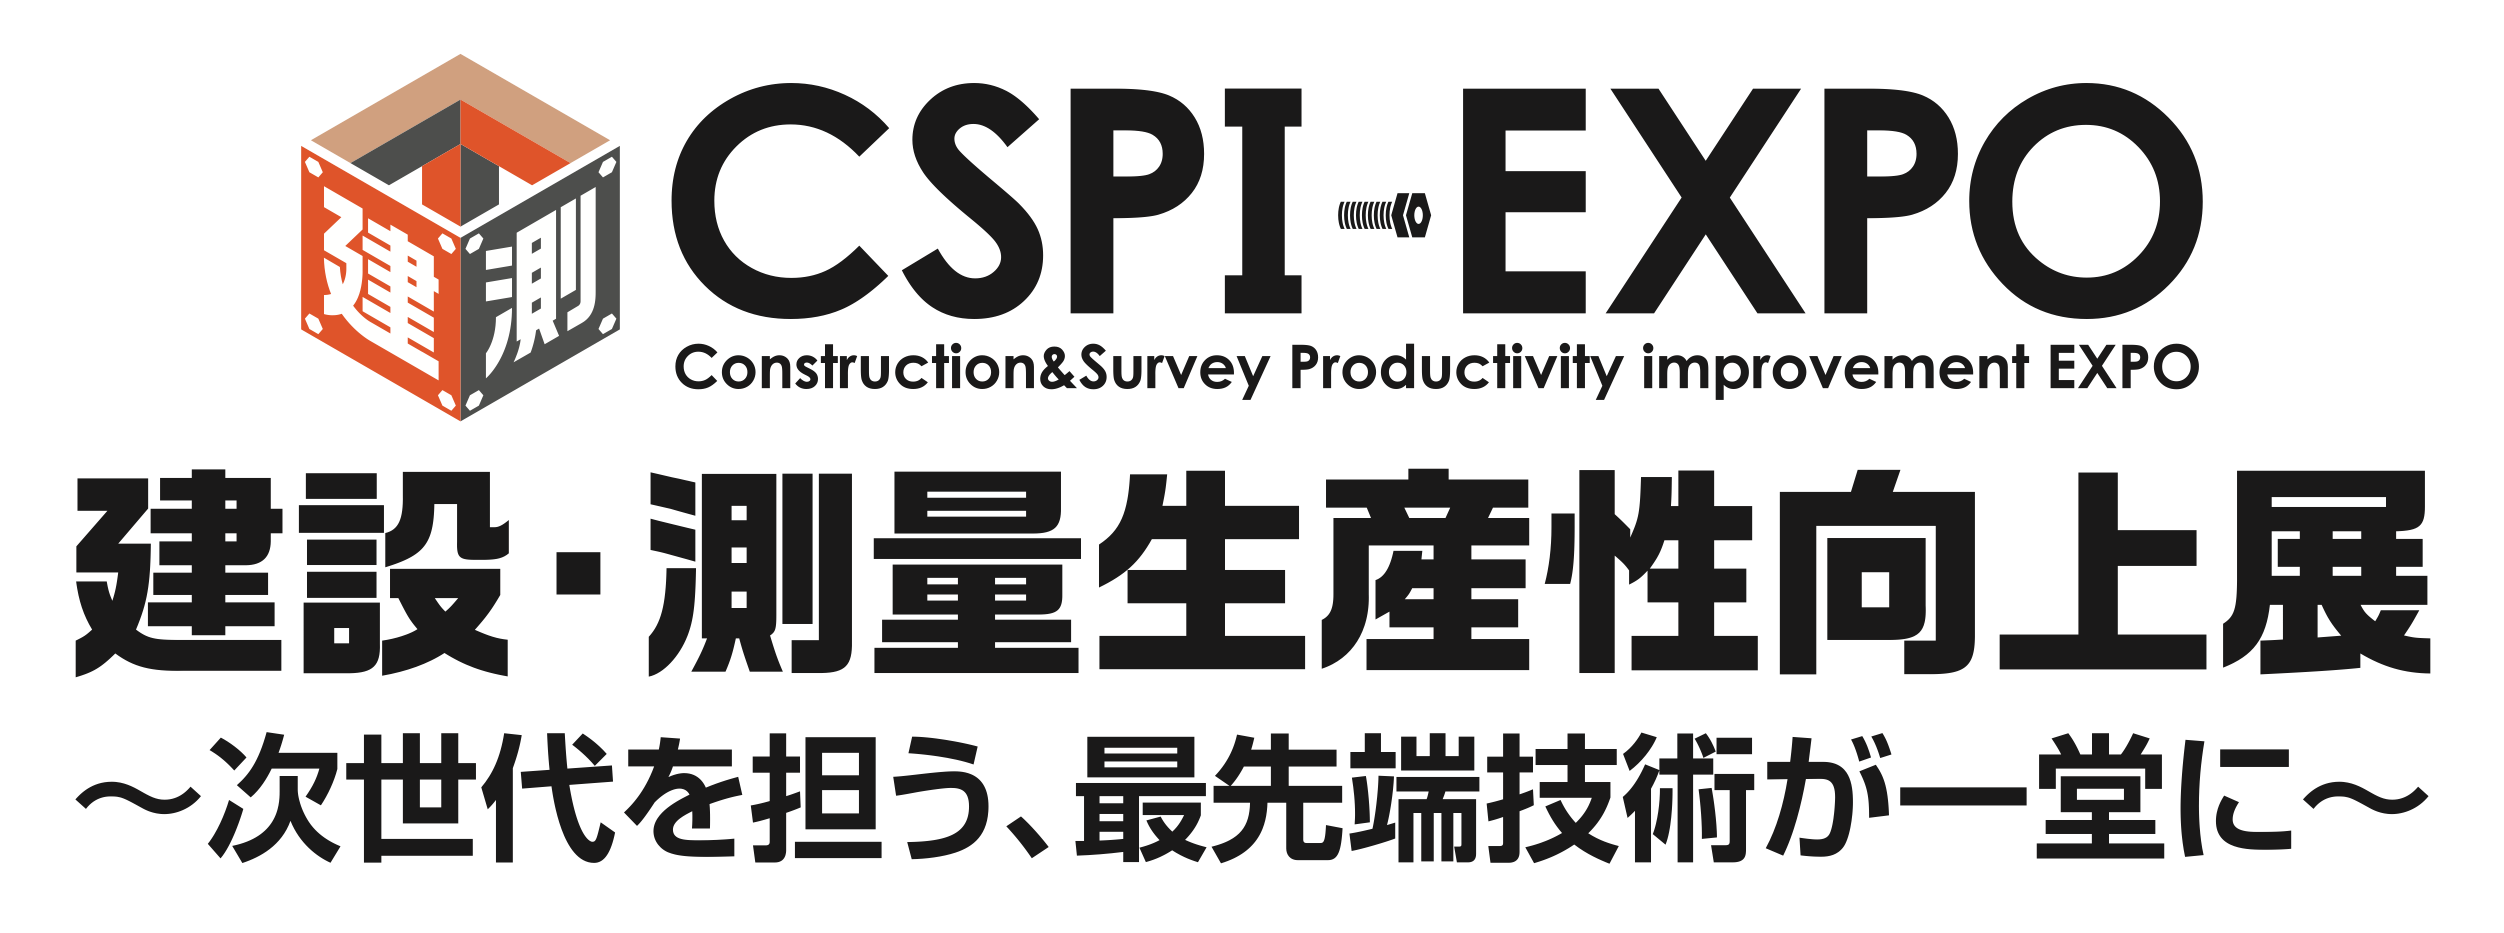 CSPI-EXPO.png